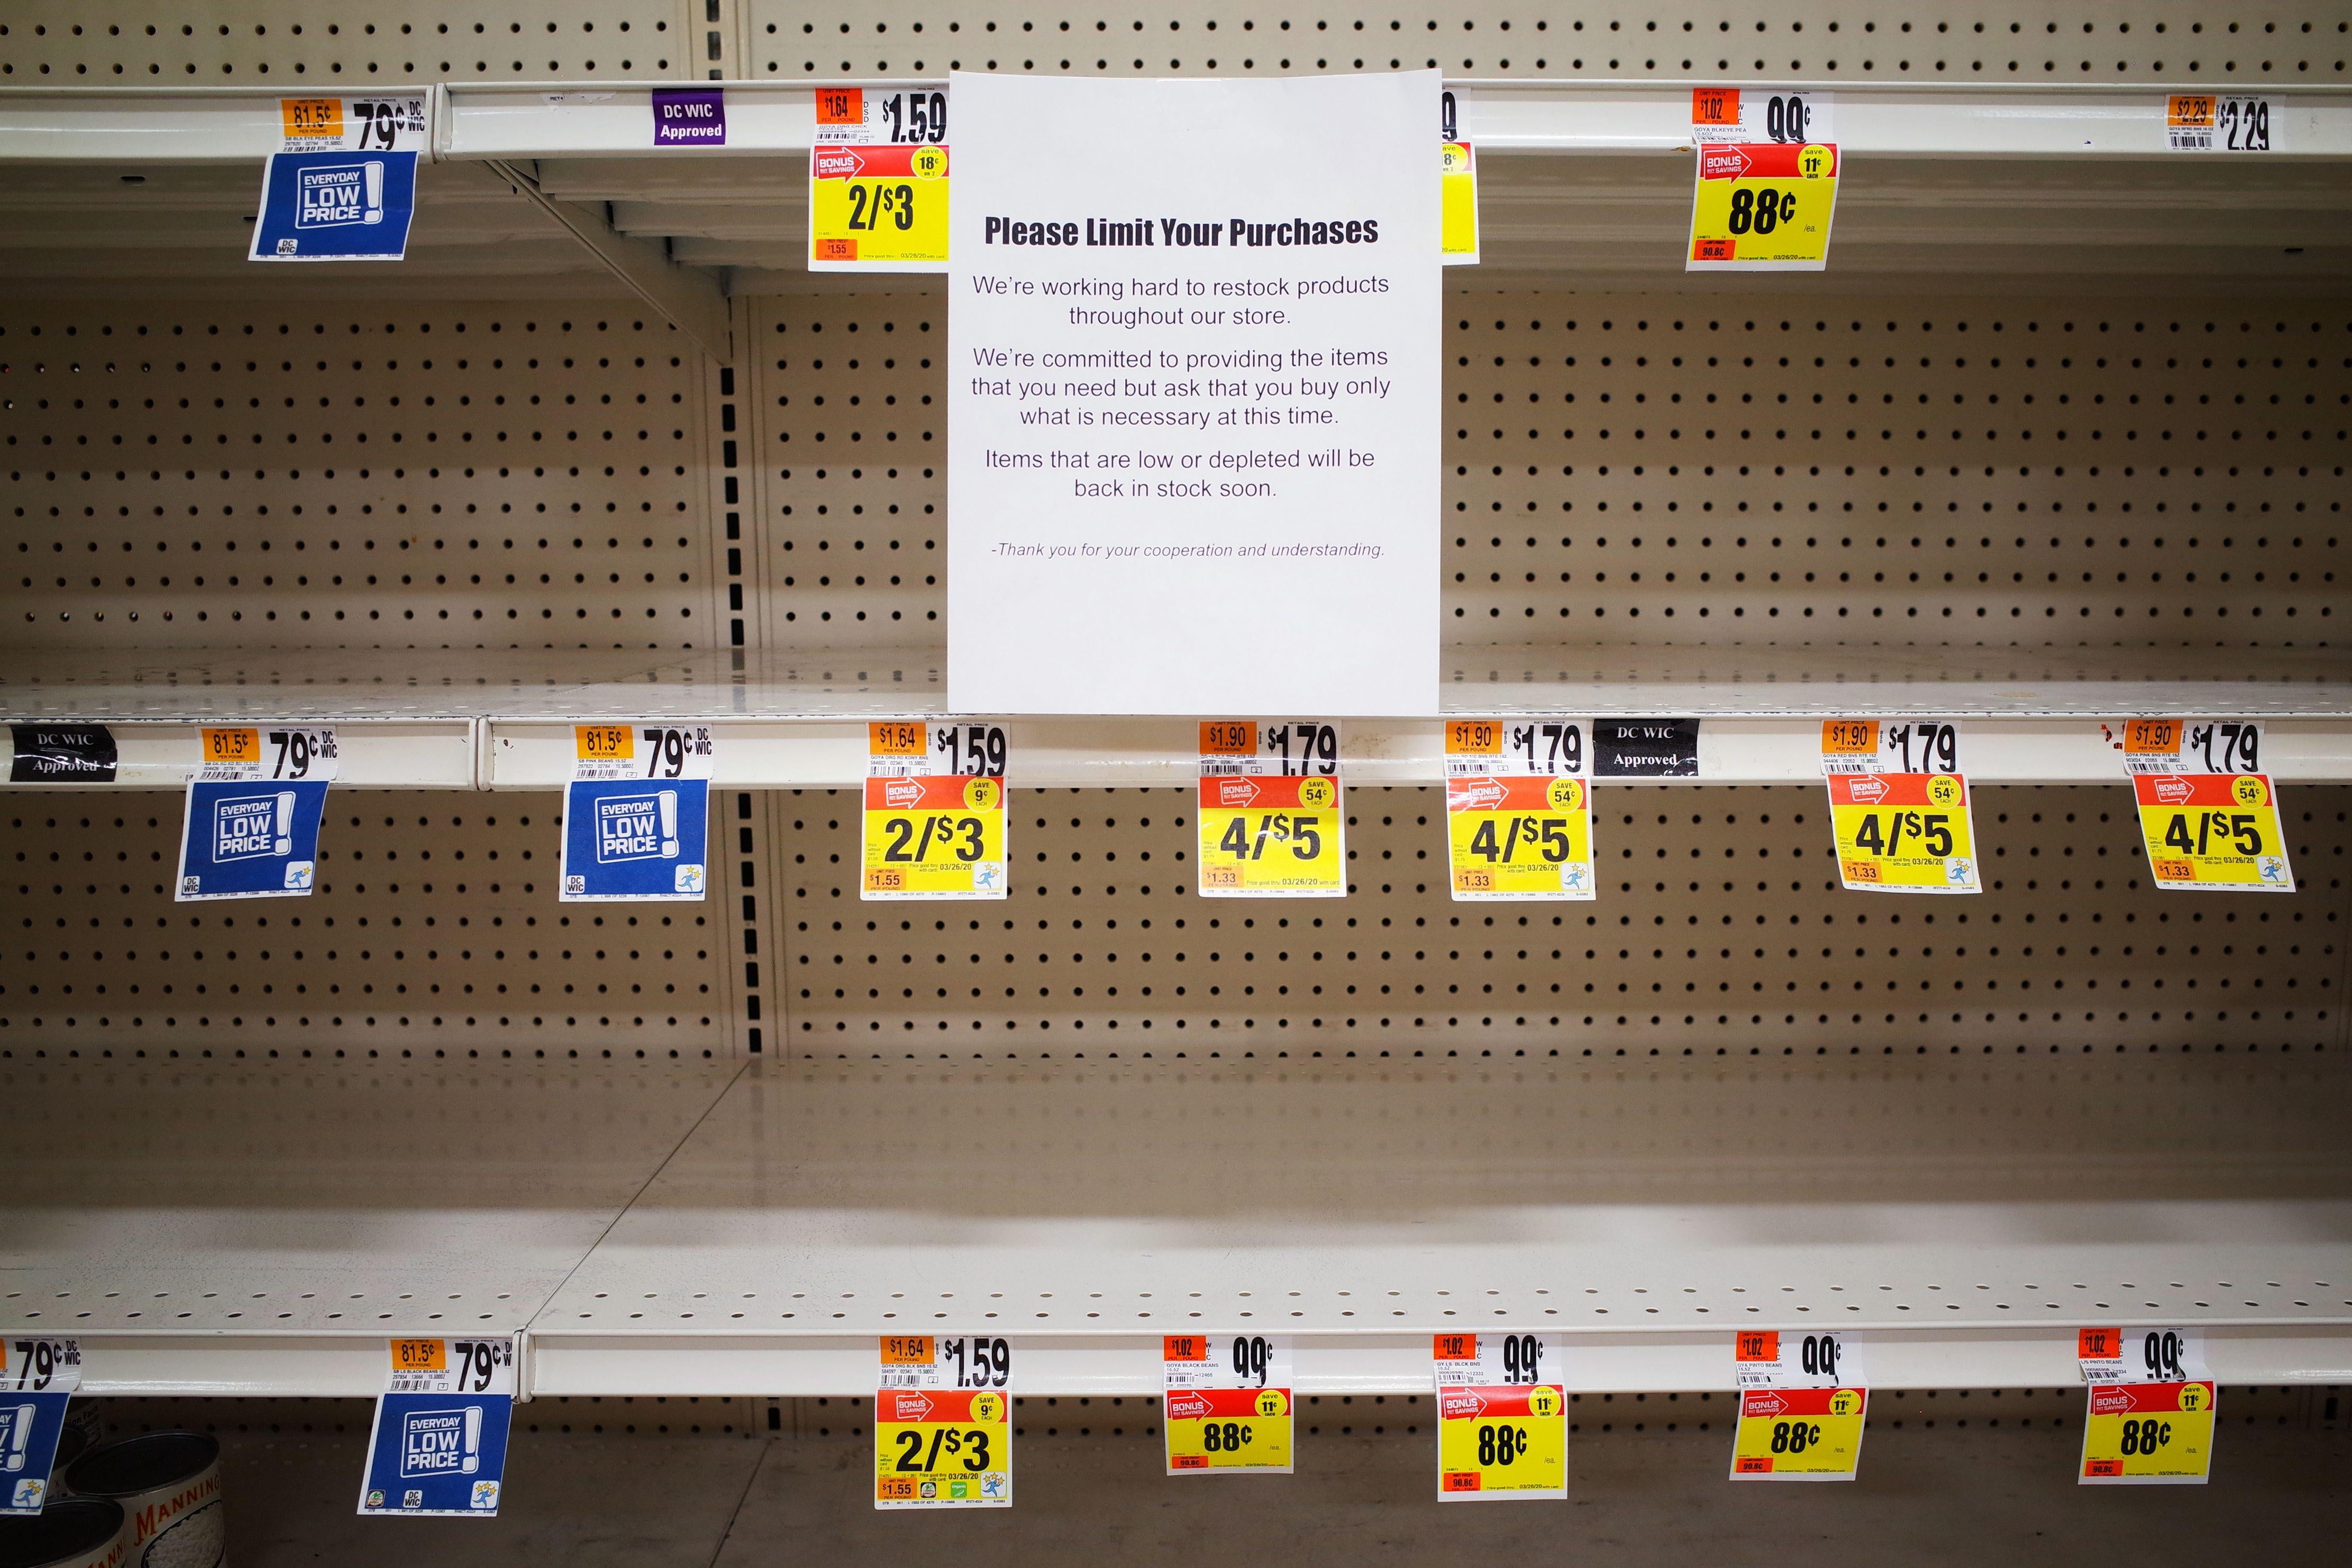 A message that says "Please limit your purchases" is posted on empty shelves for canned goods in a Giant supermarket.